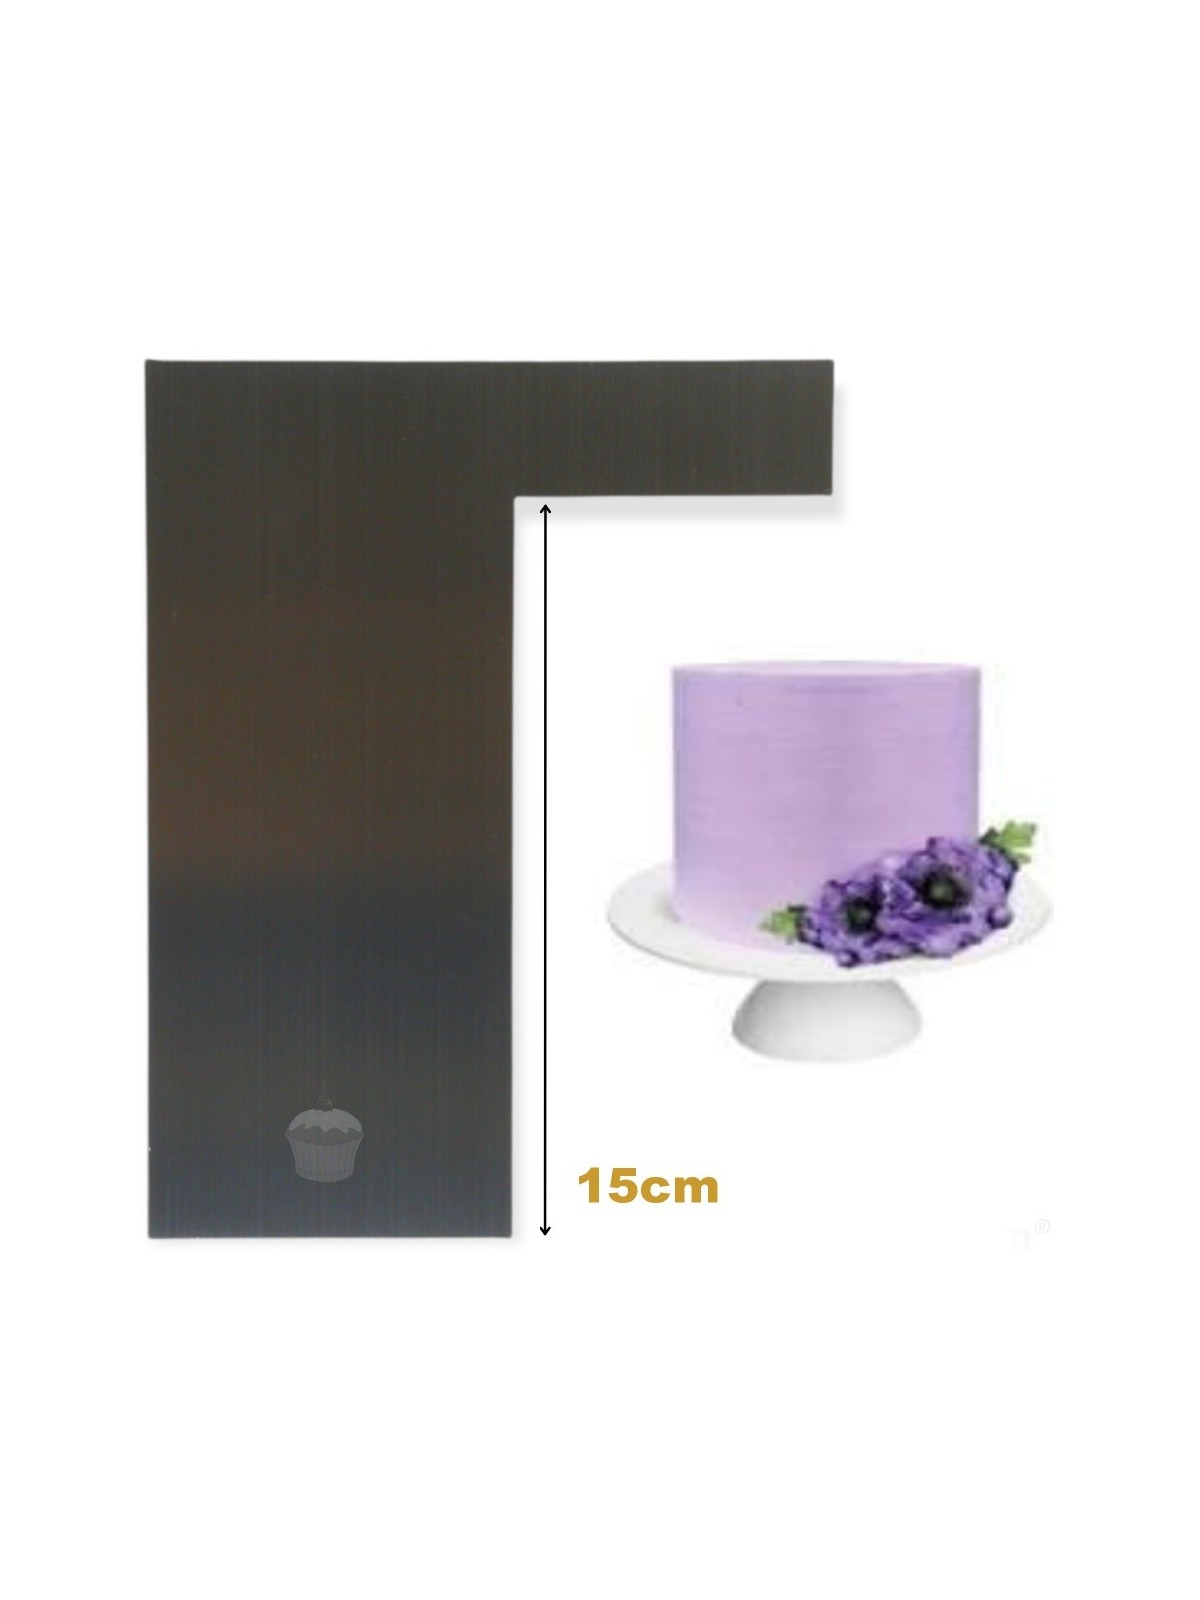 Confectionery contour card made of stainless steel - sharp corner 15cm